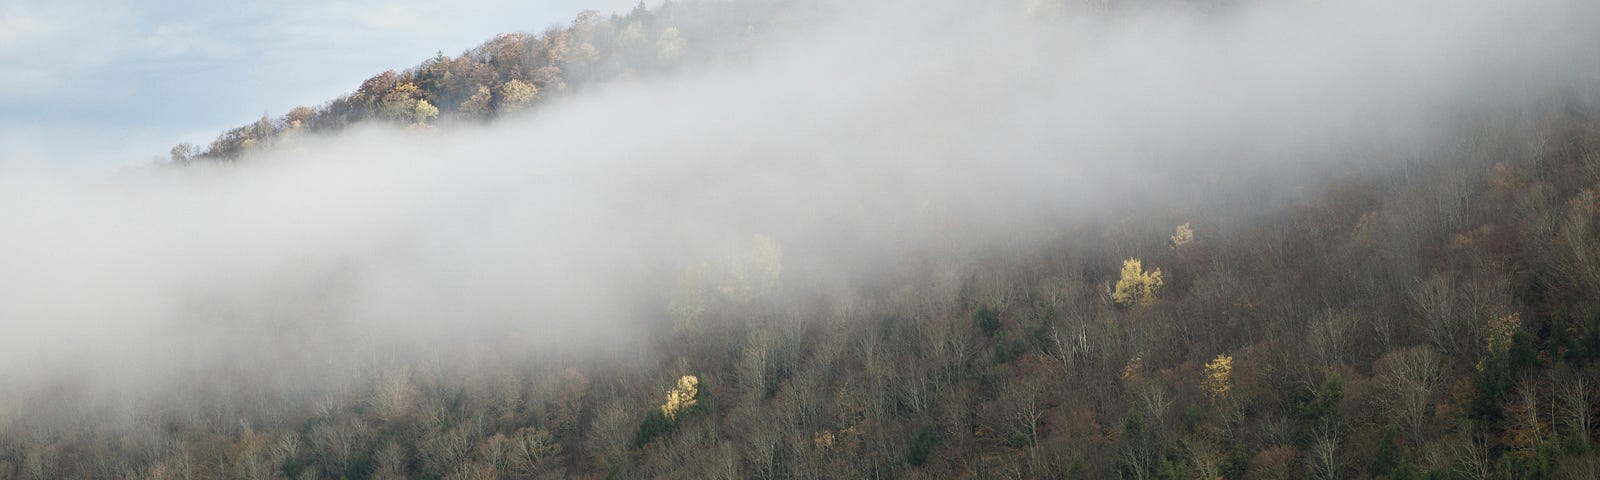 Image of mountains with fog